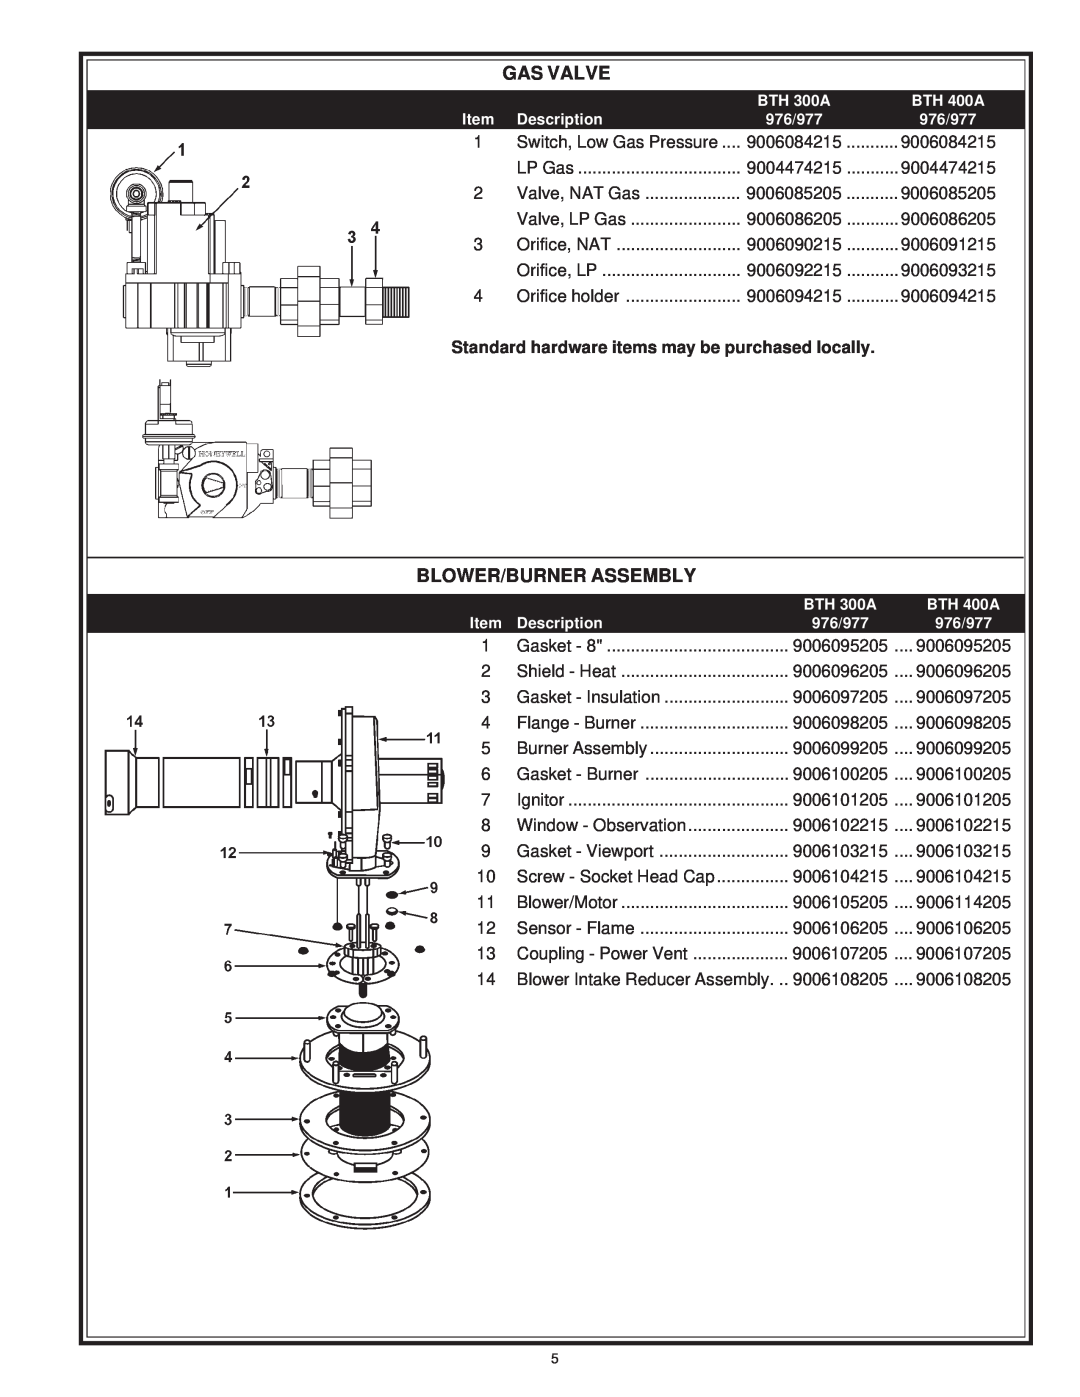 A.O. Smith 977 Series, 976 Series manual Gas Valve, Blower/Burner Assembly, Standard hardware items may be purchased locally 